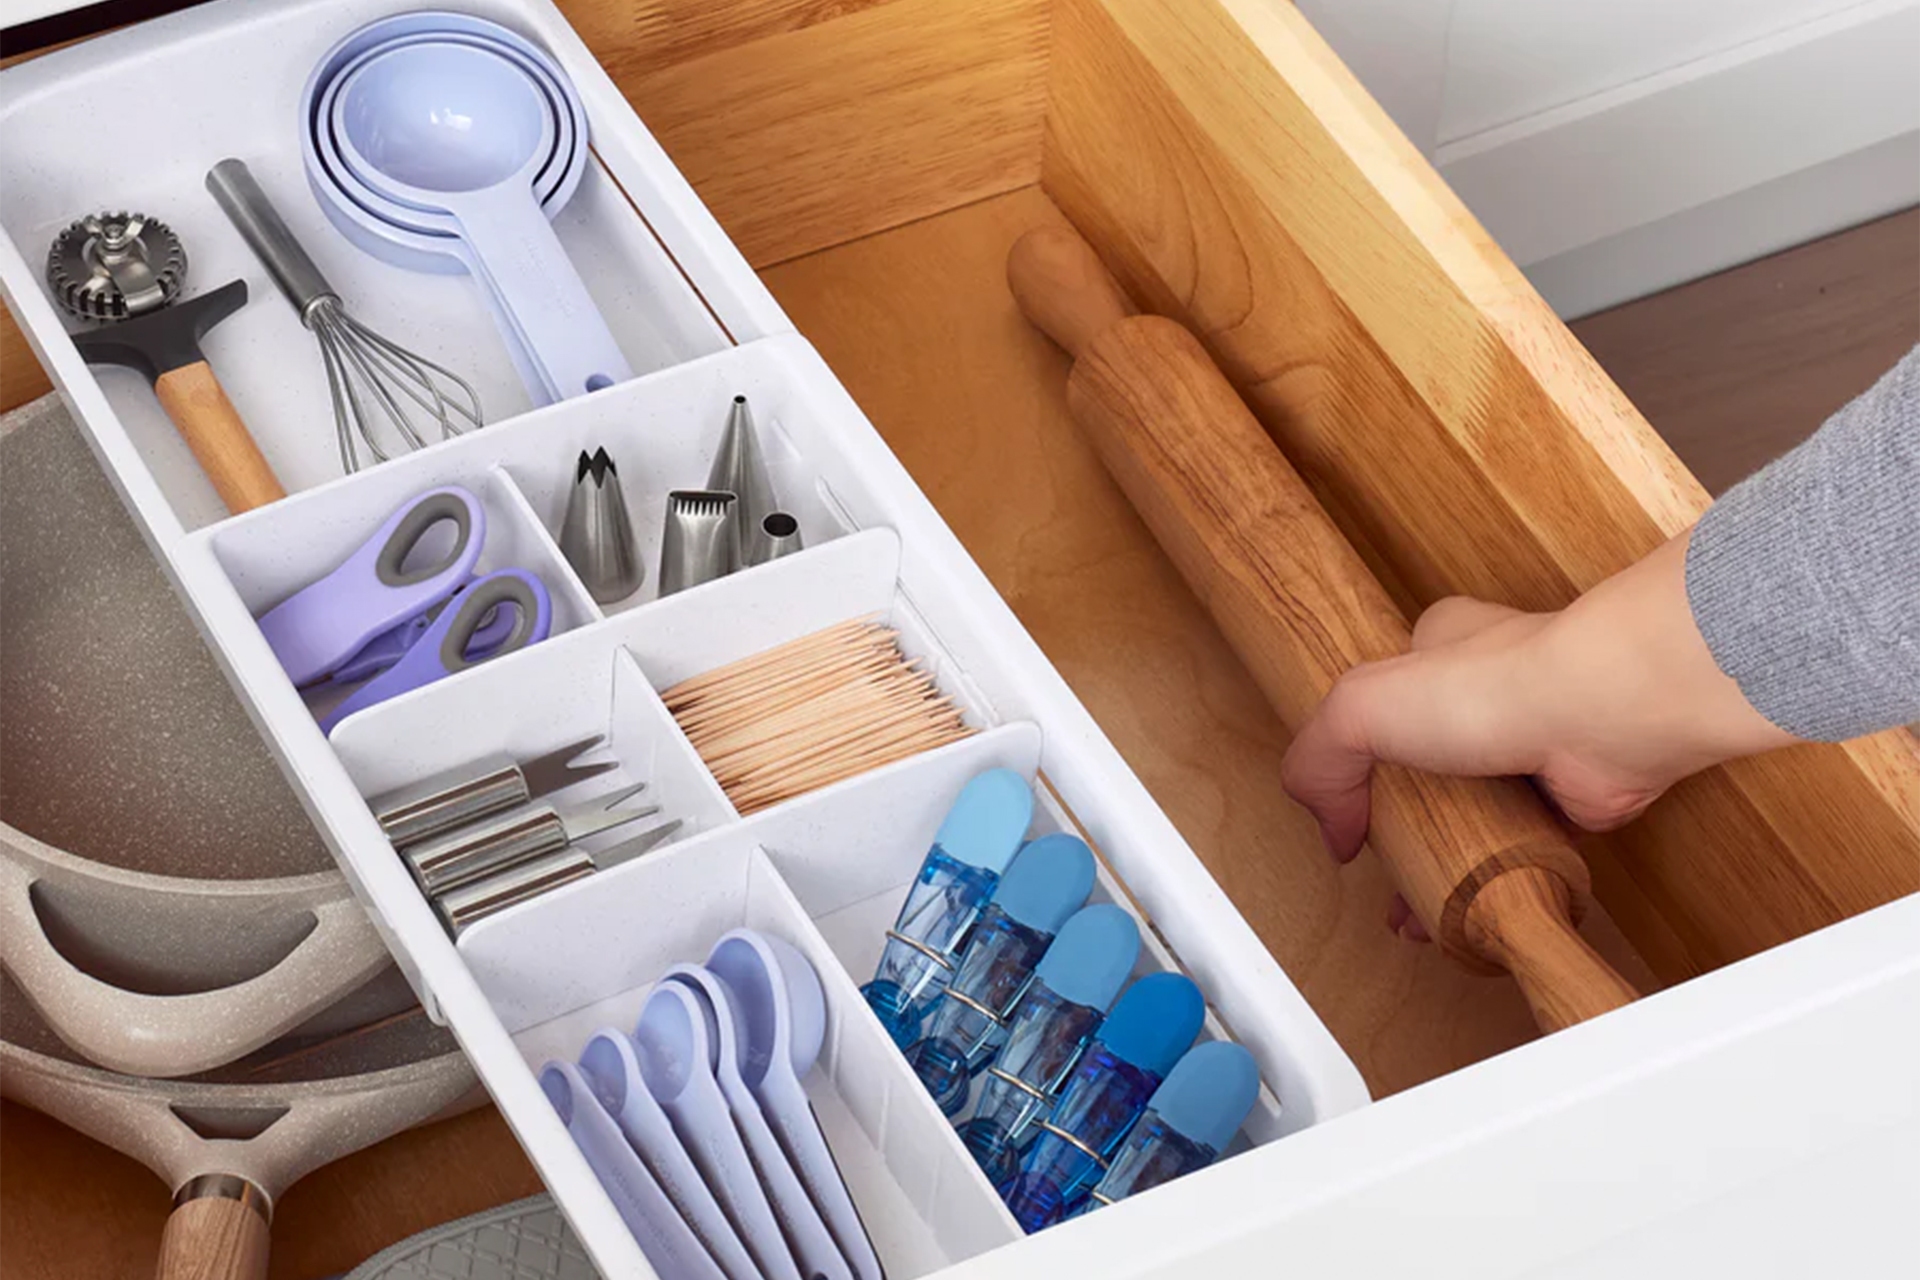 Year in Review: Home Storage, Organization, Non-Electric Cleaning